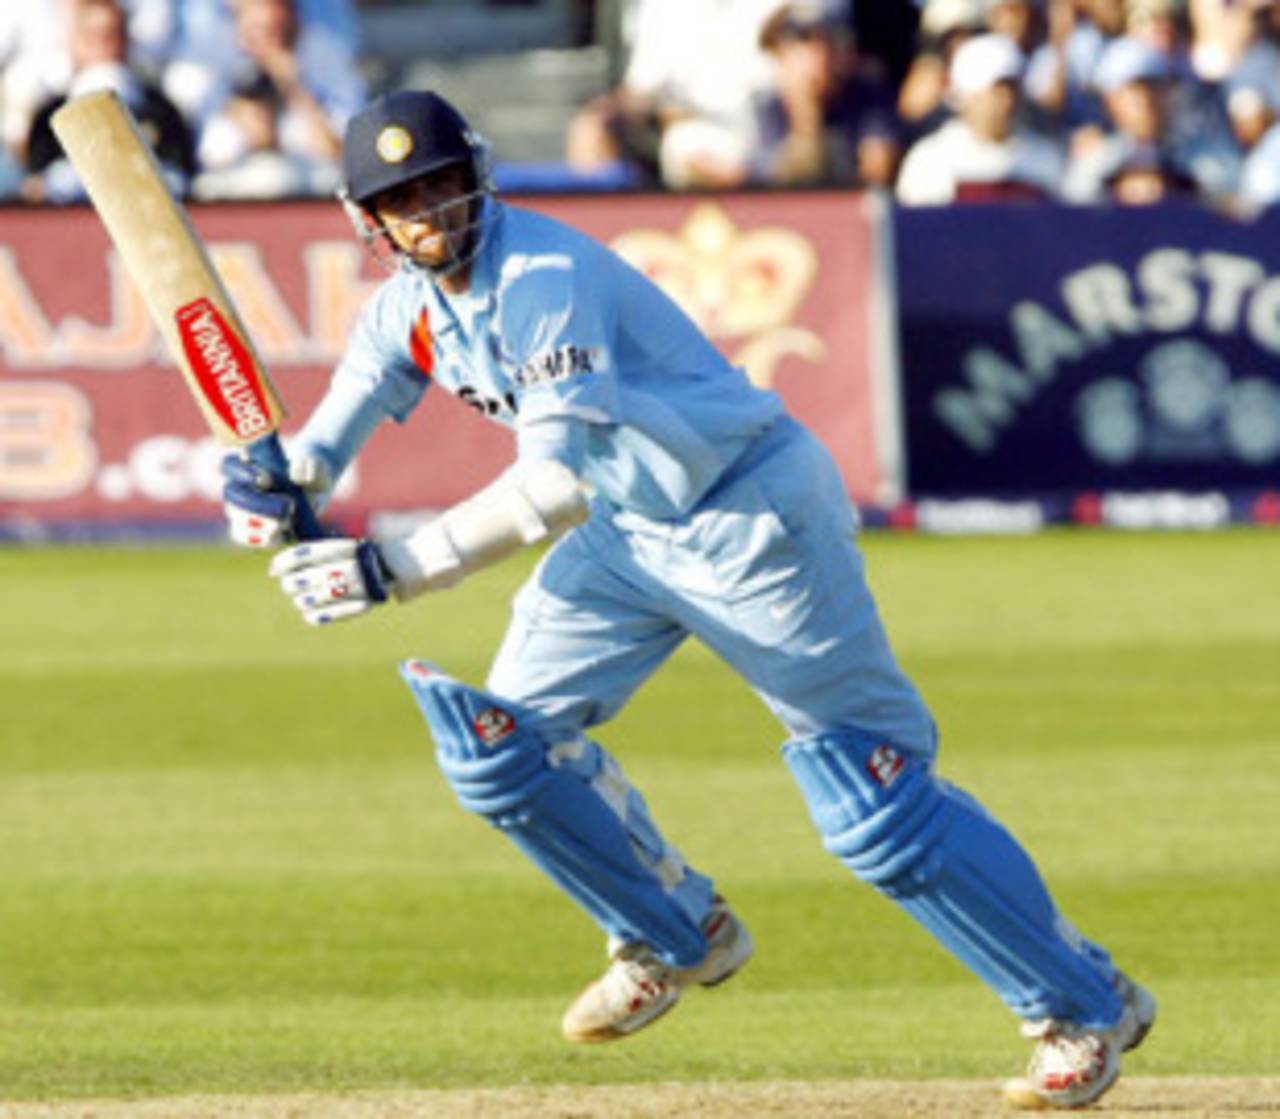 Rahul Dravid's 92 off 63 balls helped India pile 93 runs in the last 10 overs, England v India, 2nd ODI, Bristol, August 24, 2007